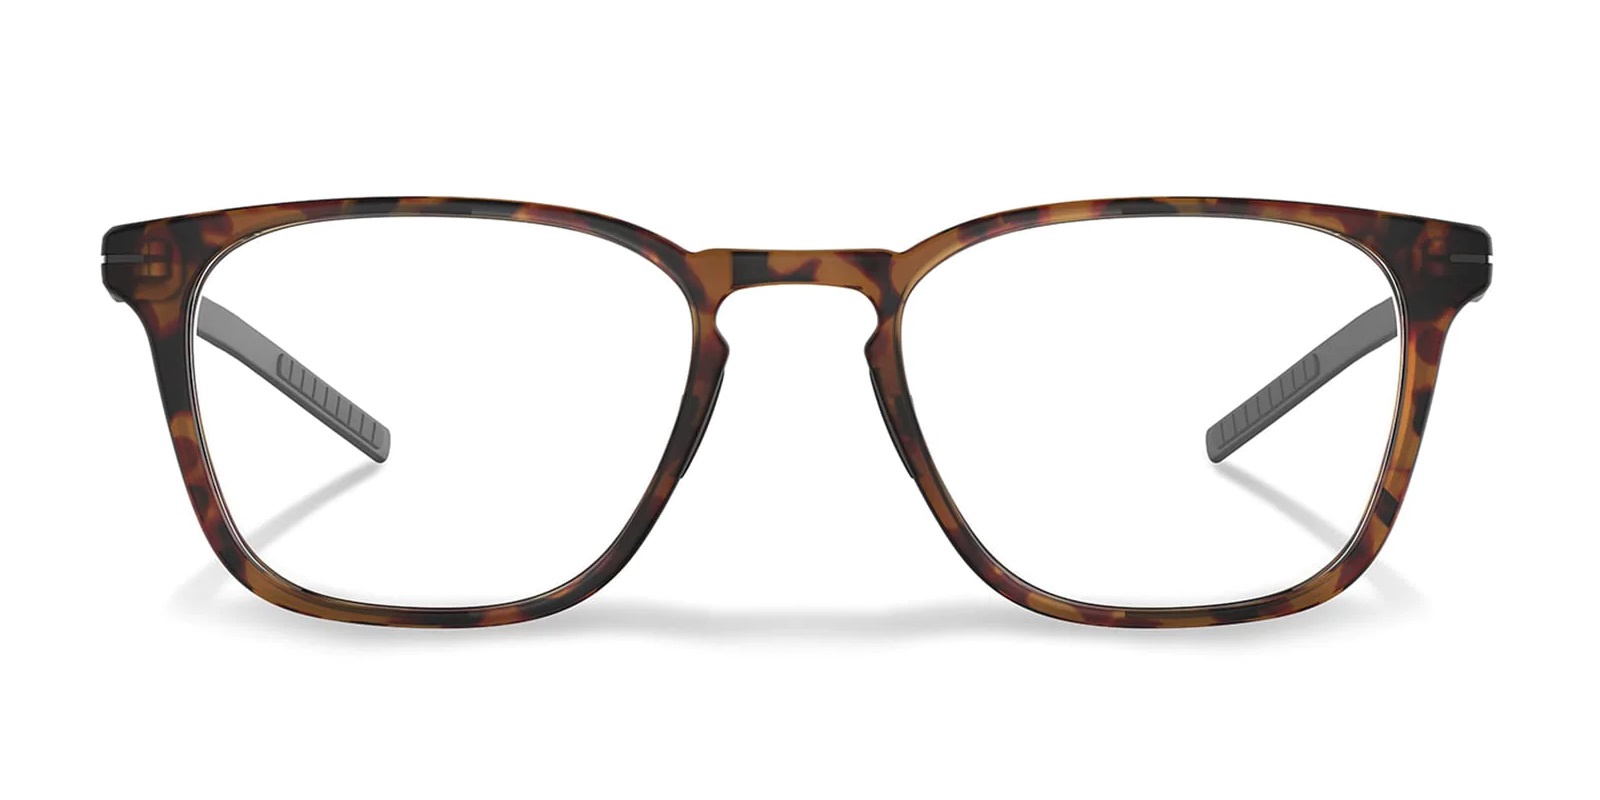 Mens Fashion Eyeglass Frames At Attractive Prices